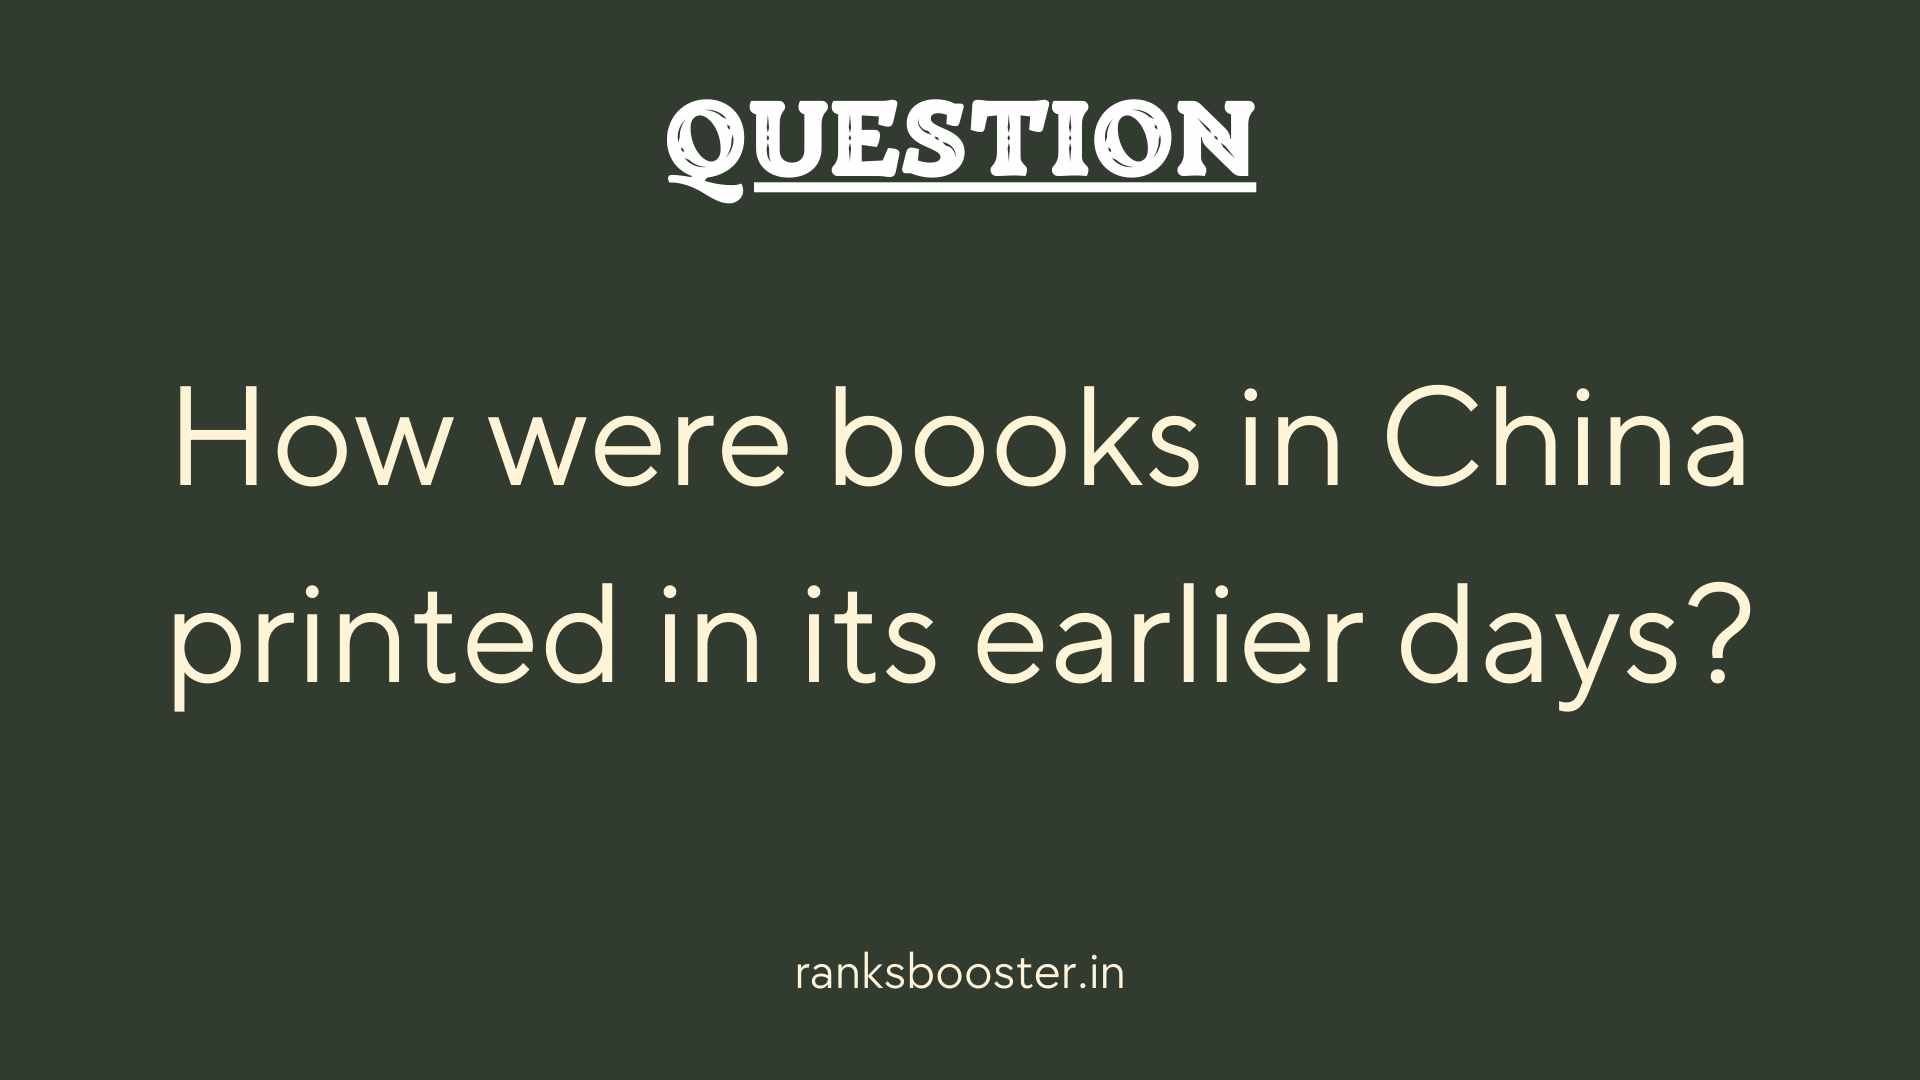 Question: How were books in China printed in its earlier days?